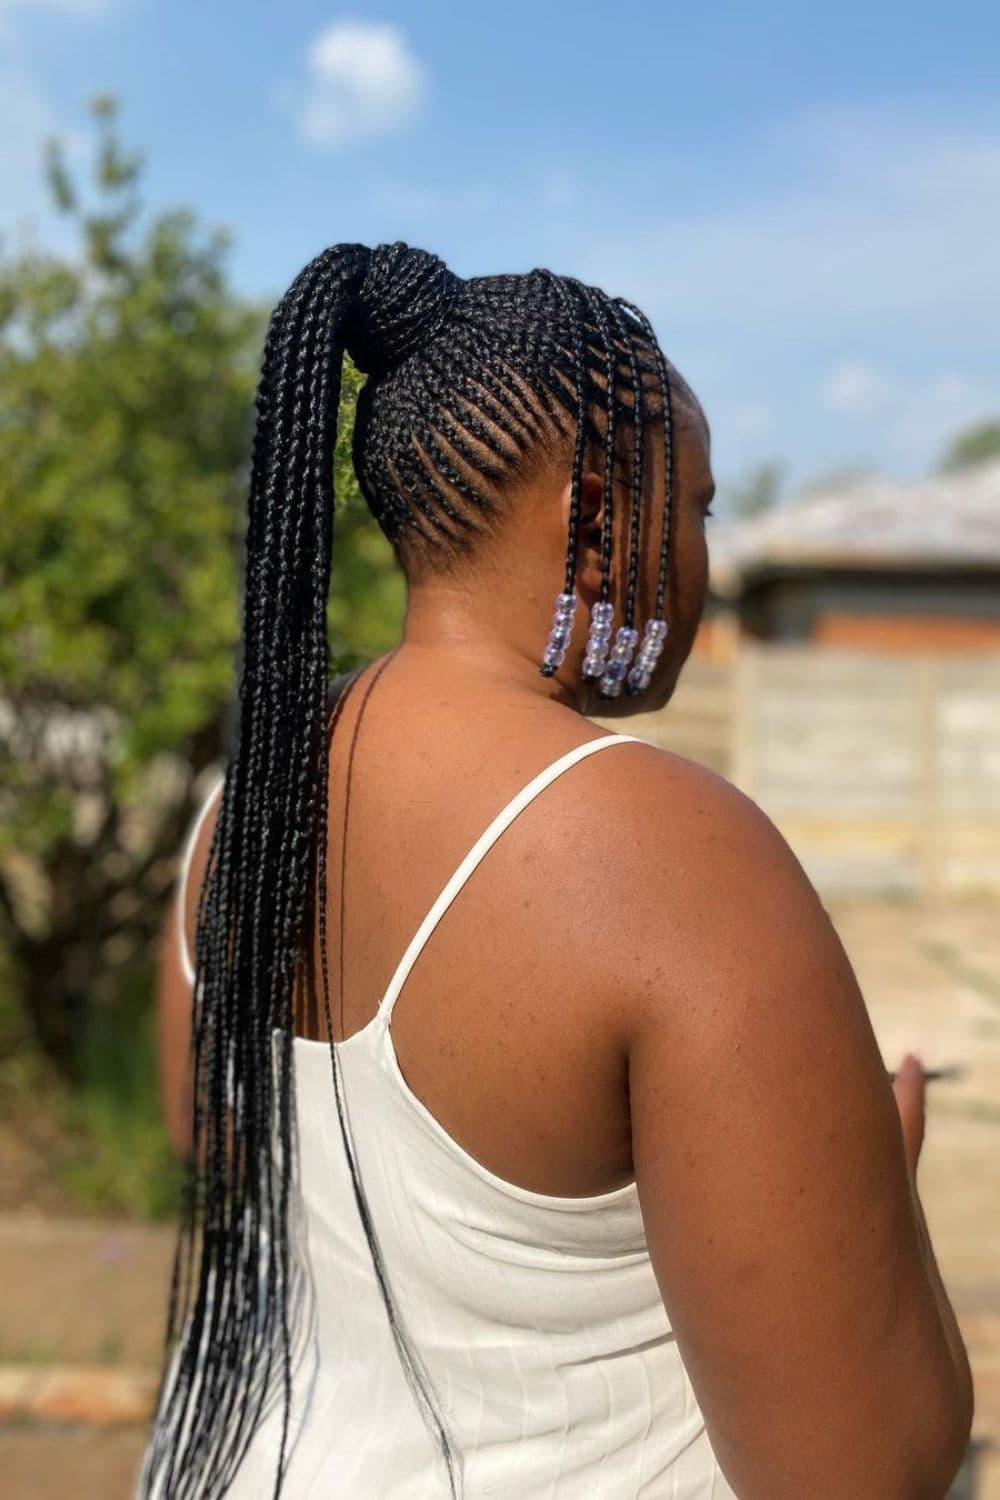 Side view of a woman with cornrows with beads ponytail.